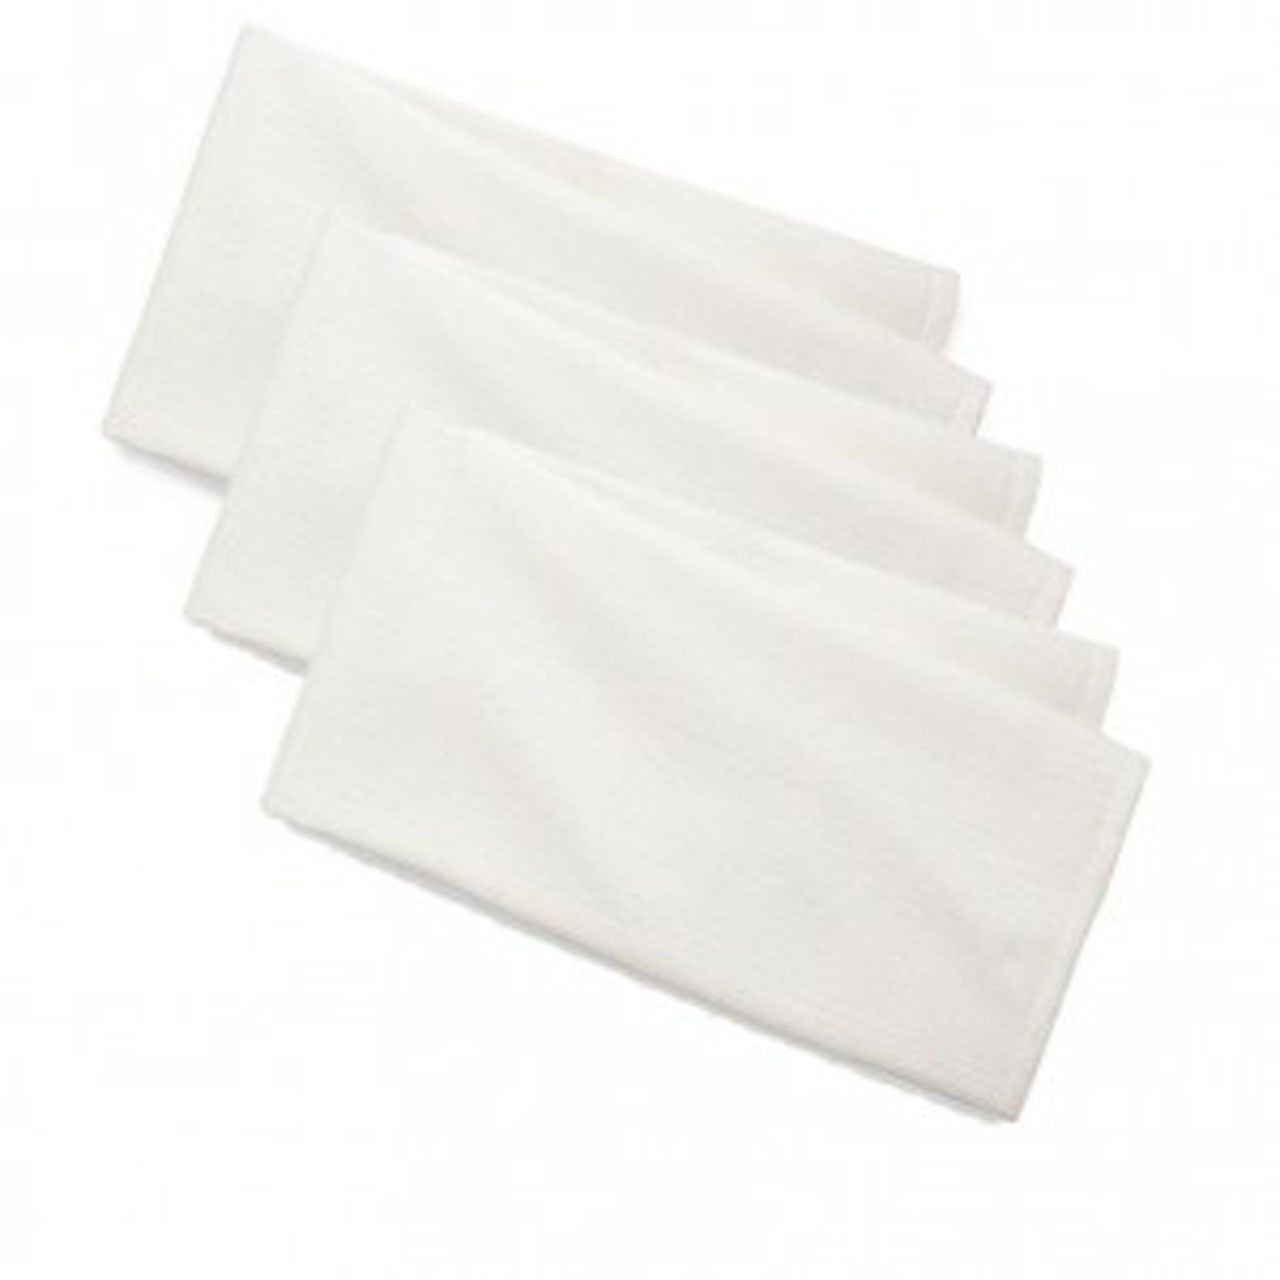 What benefits do huck towels offer in wholesale?